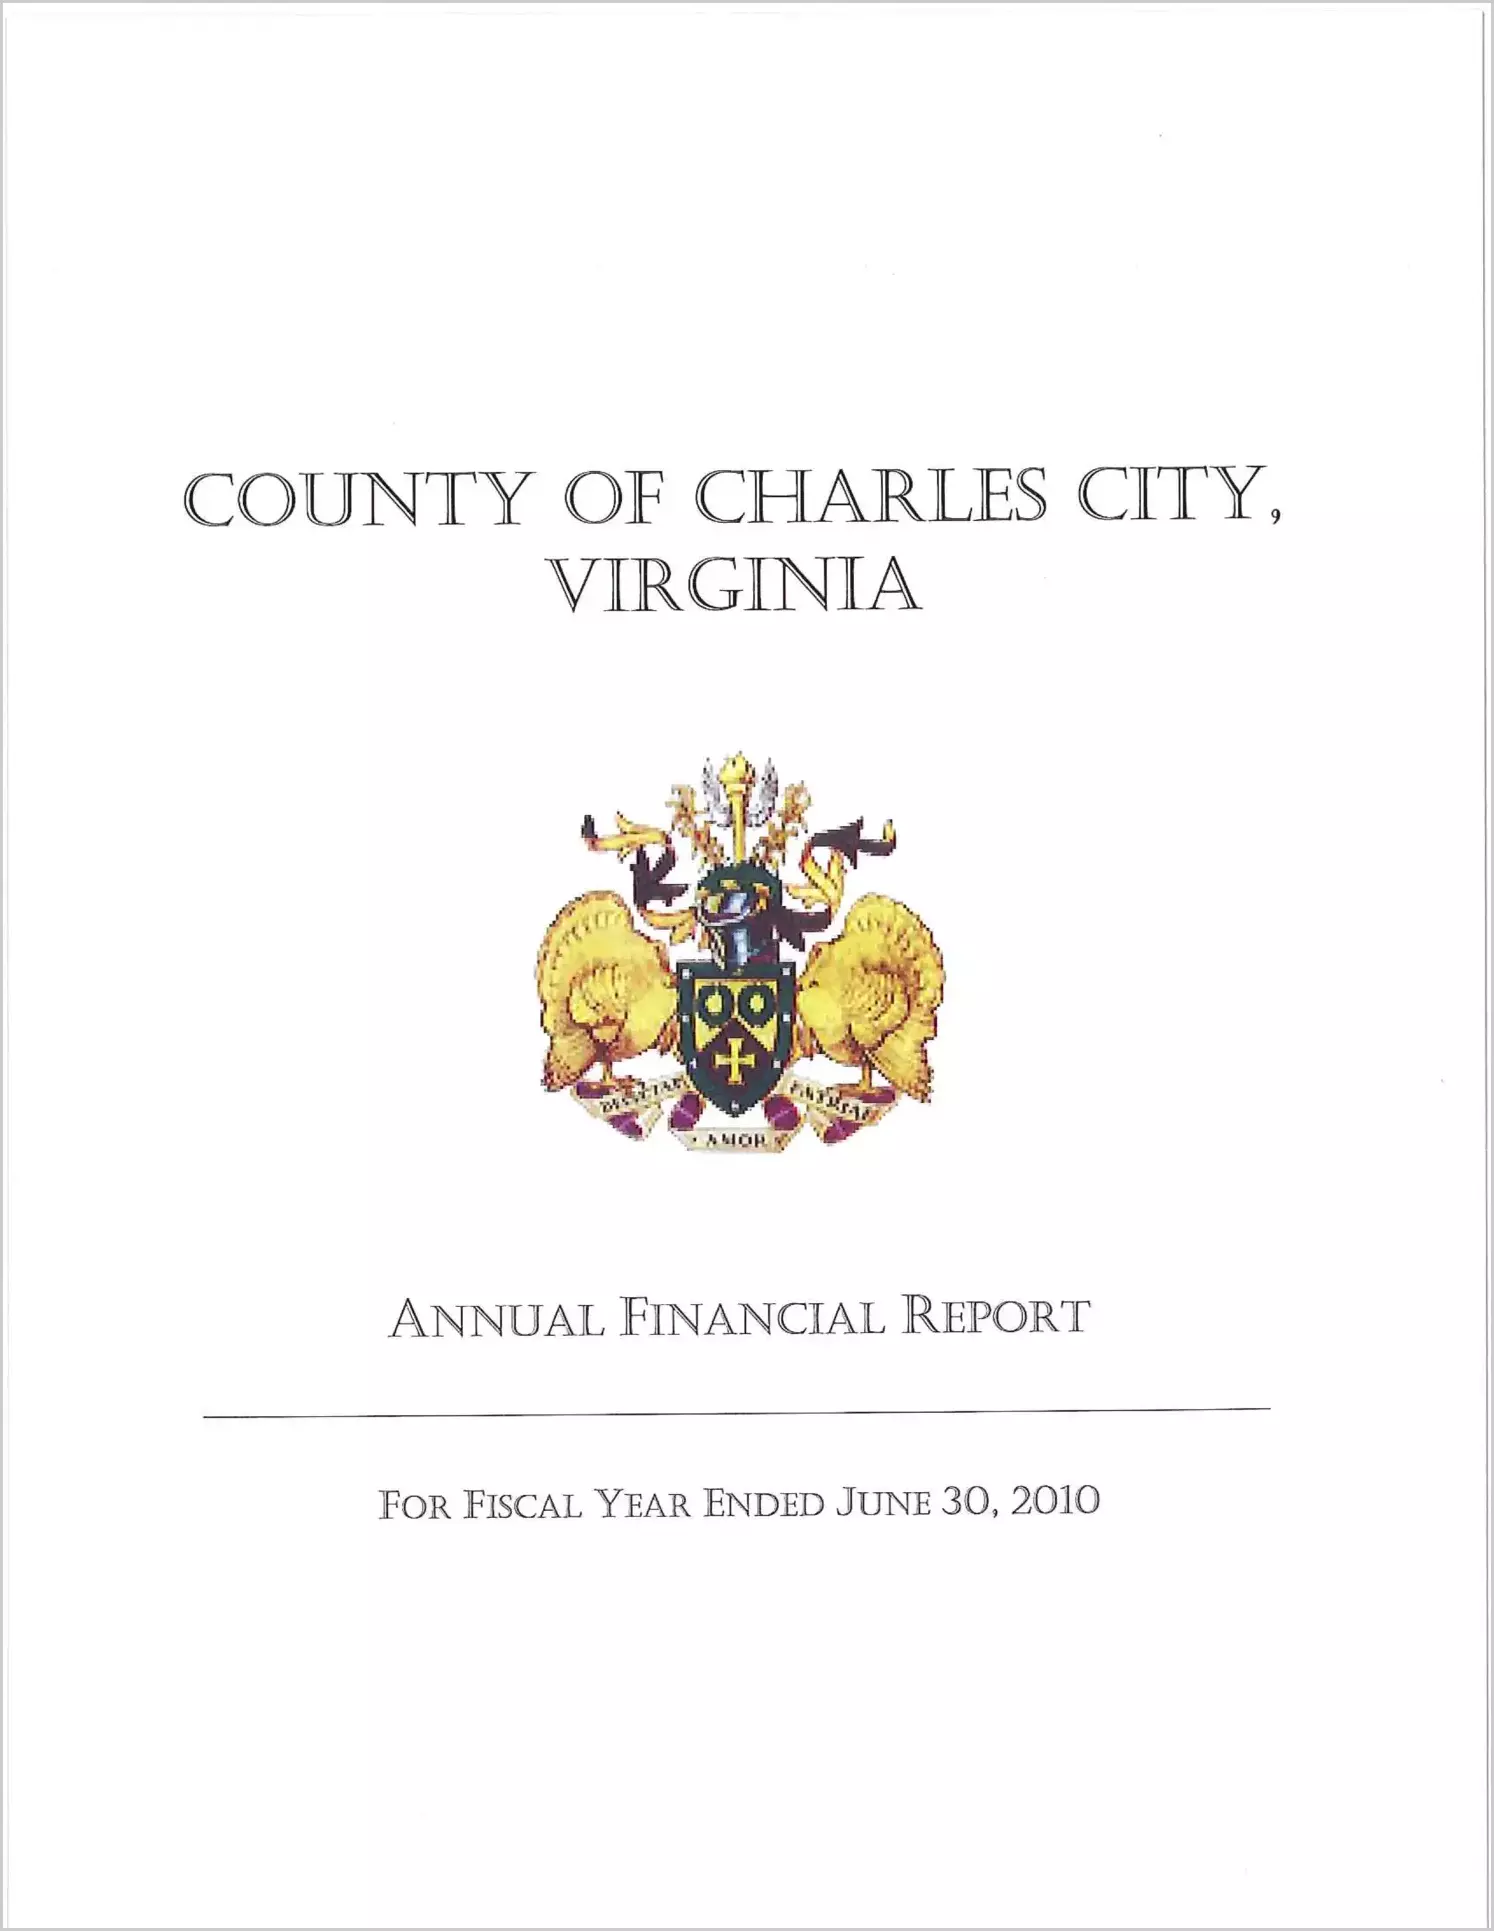 2010 Annual Financial Report for County of Charles City